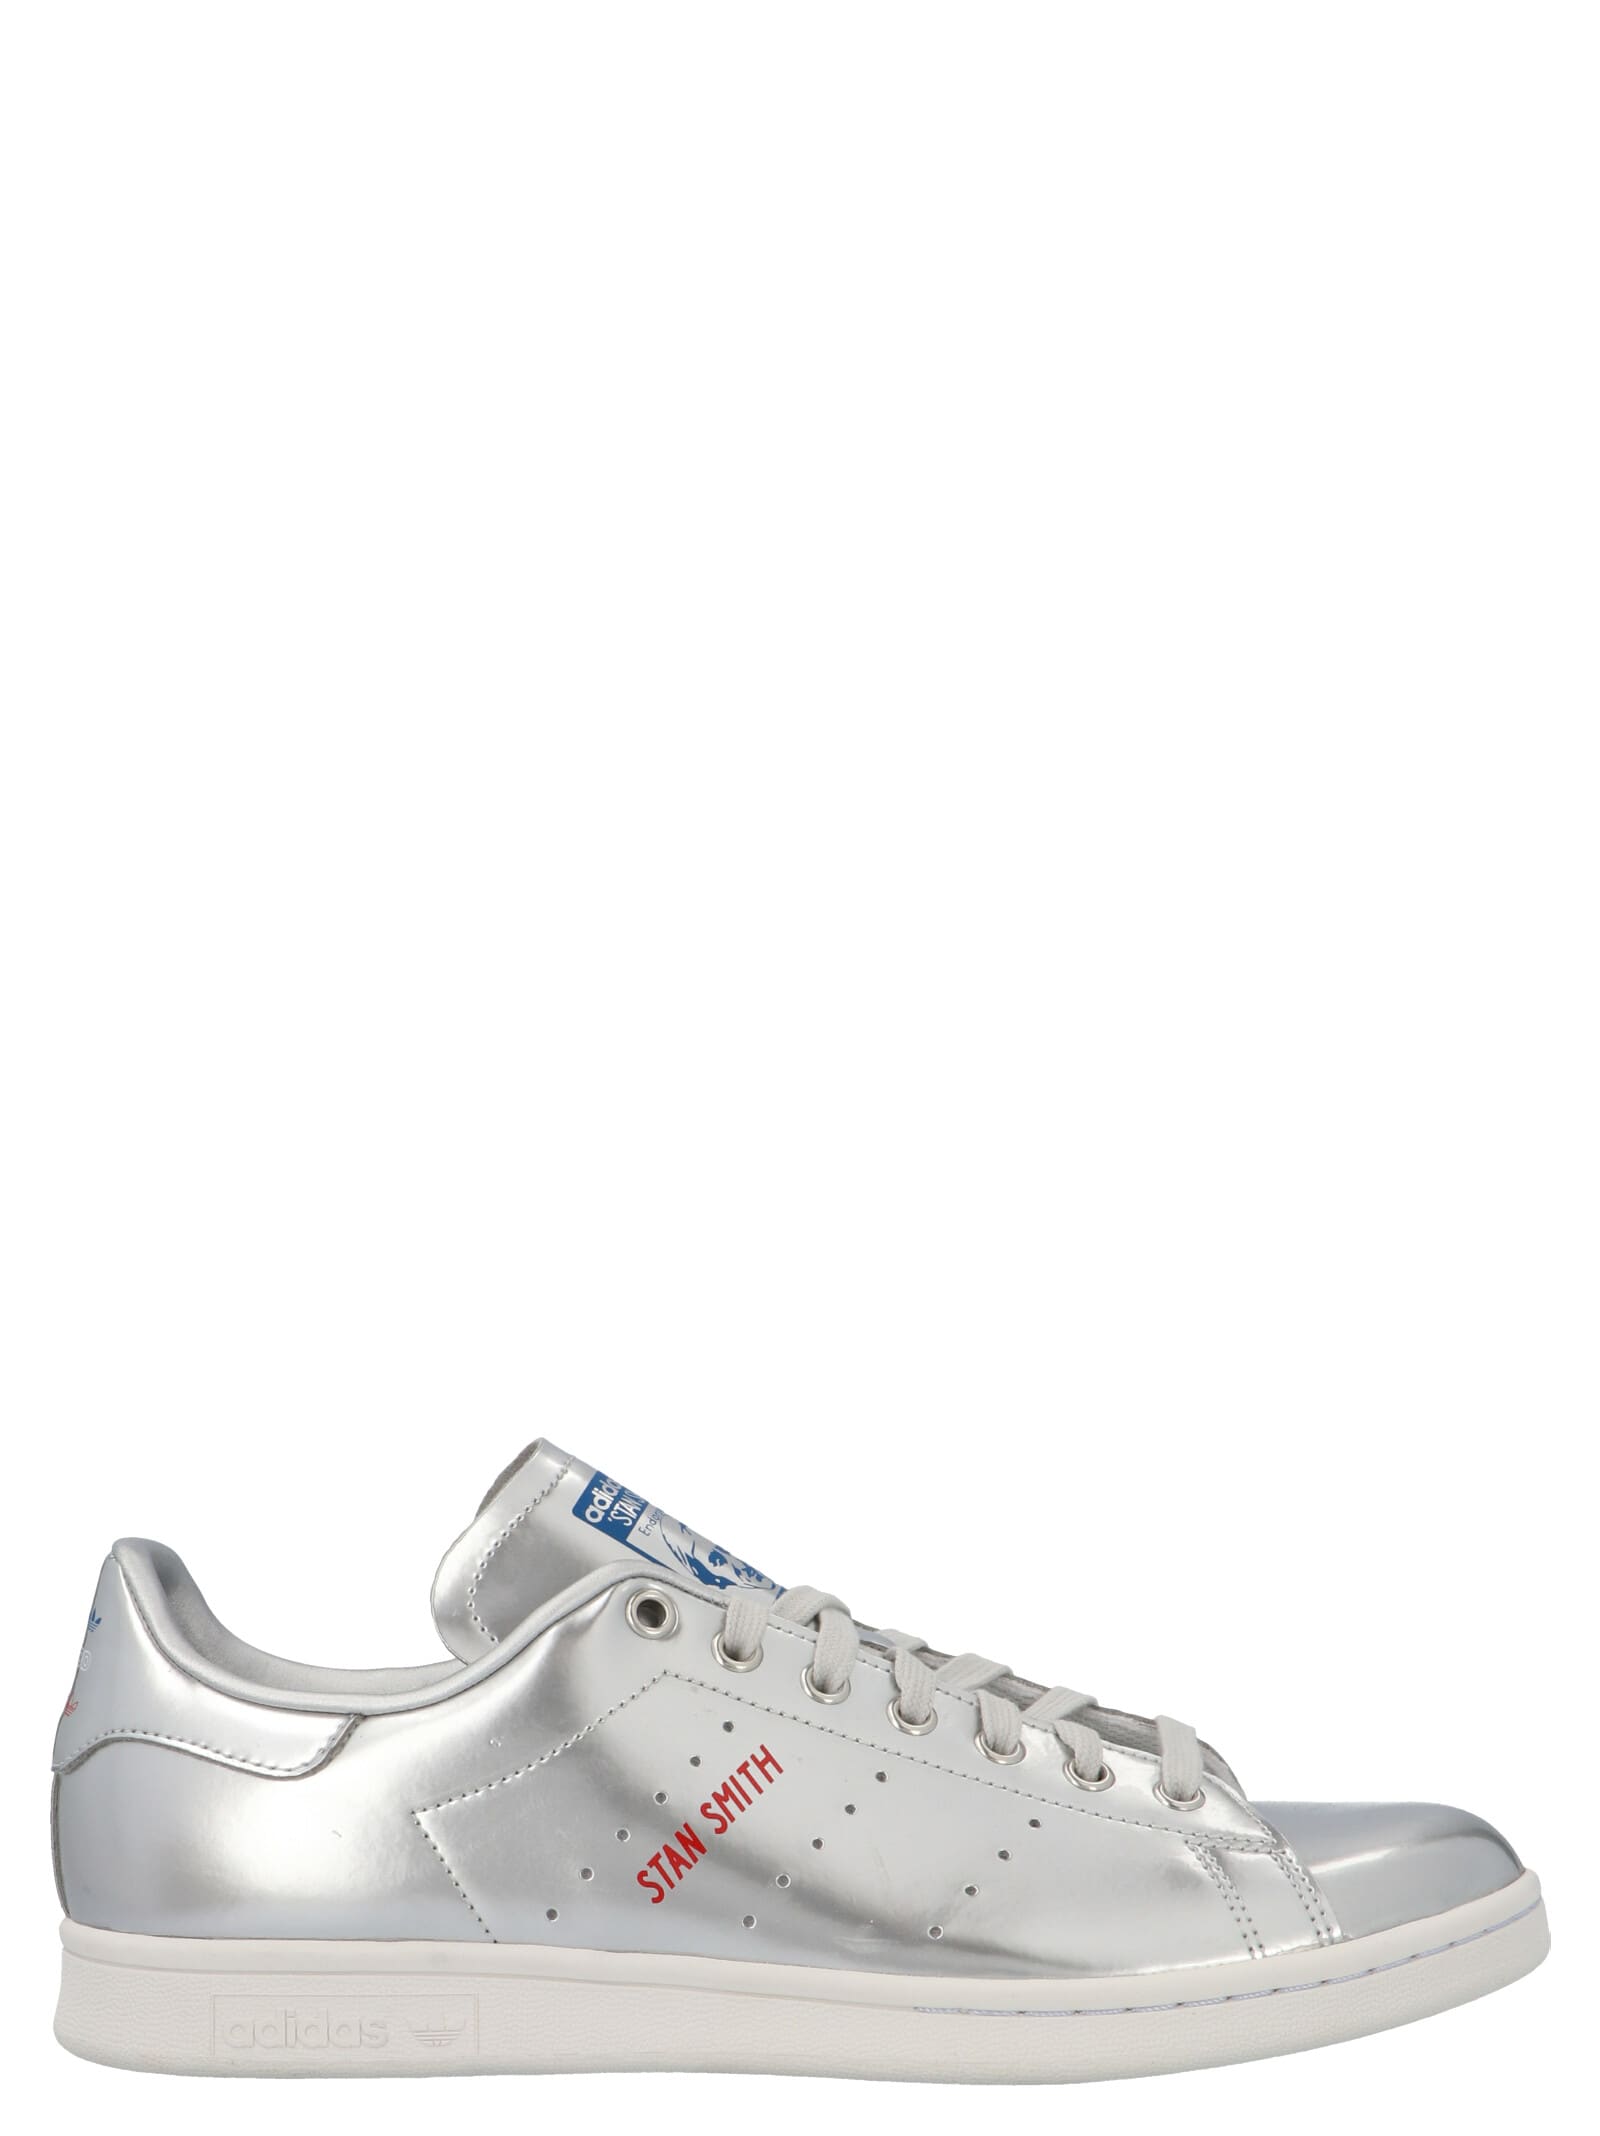 stan smith shoes sale